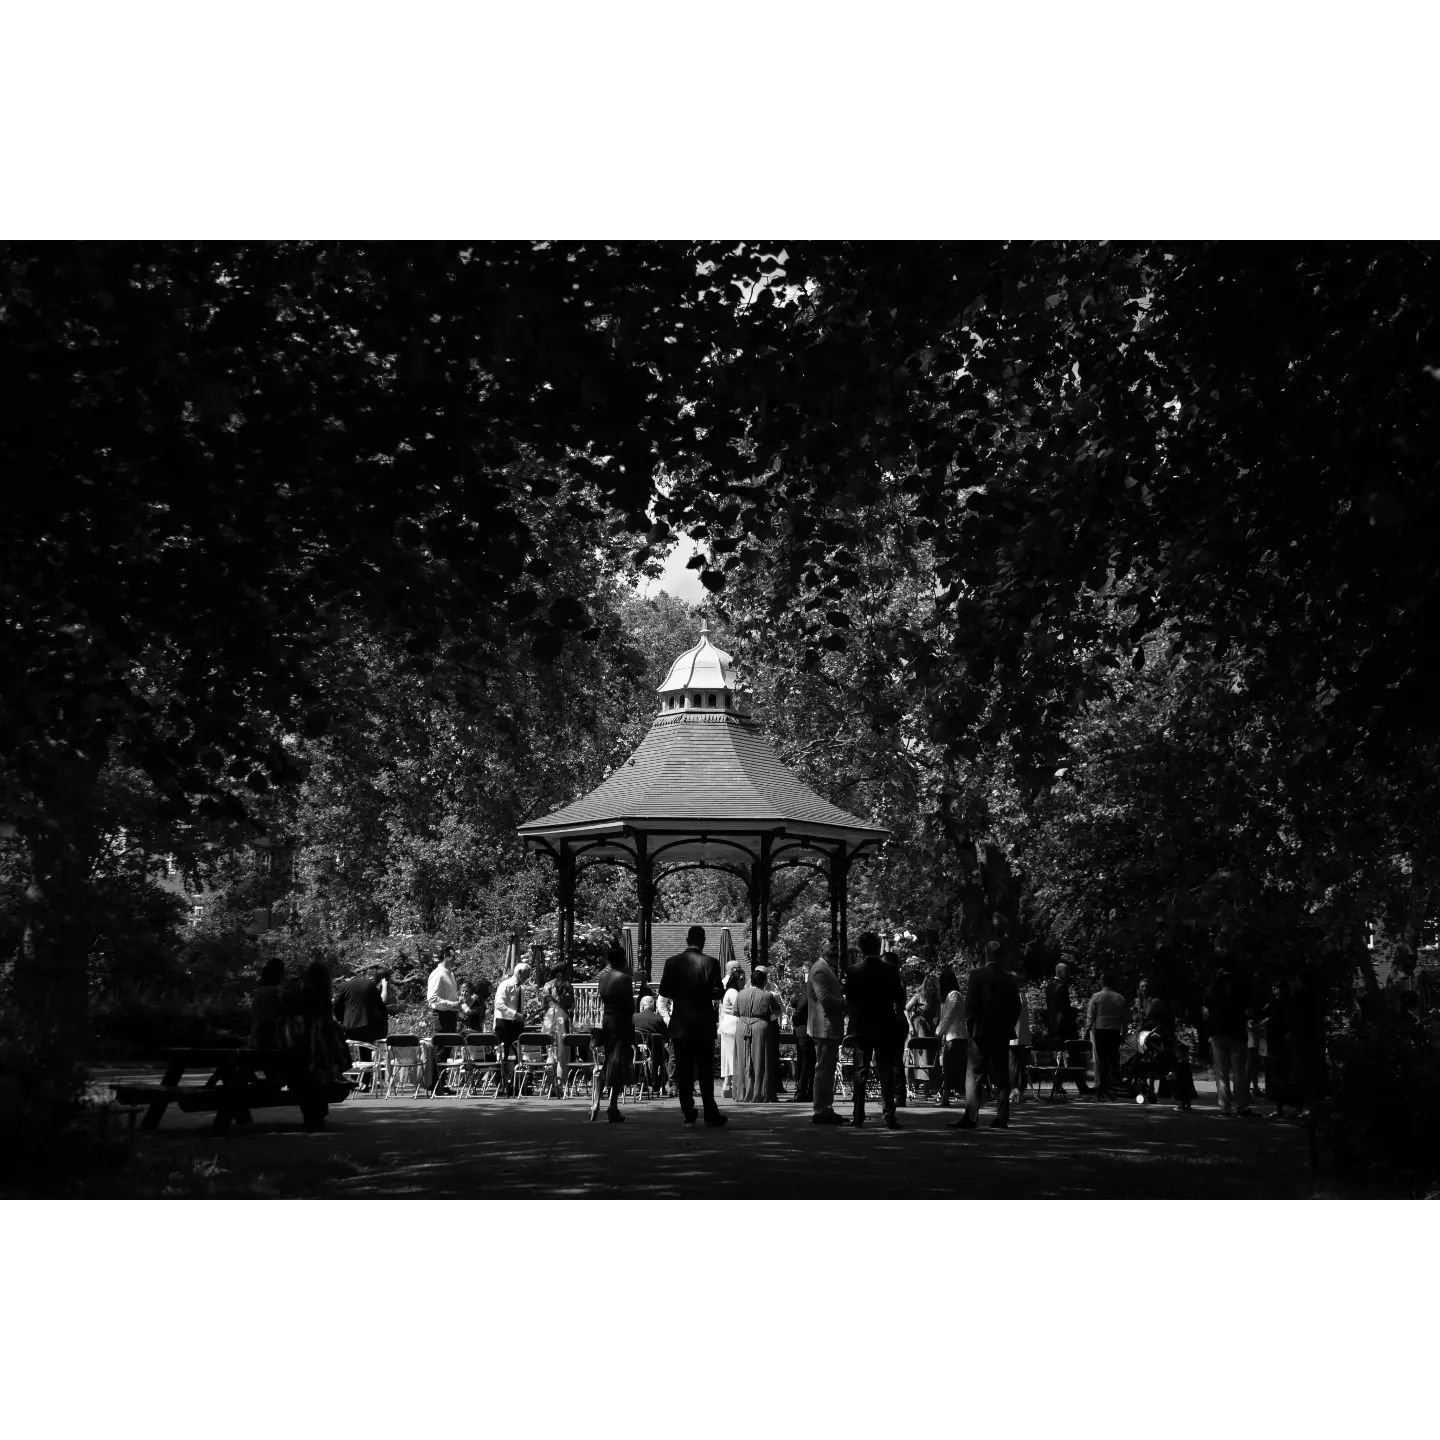 Had a wonderful time shooting a gorgeous couple and their nearest and dearest yesterday at Myatt's Fields Park in Brixton! ❤️